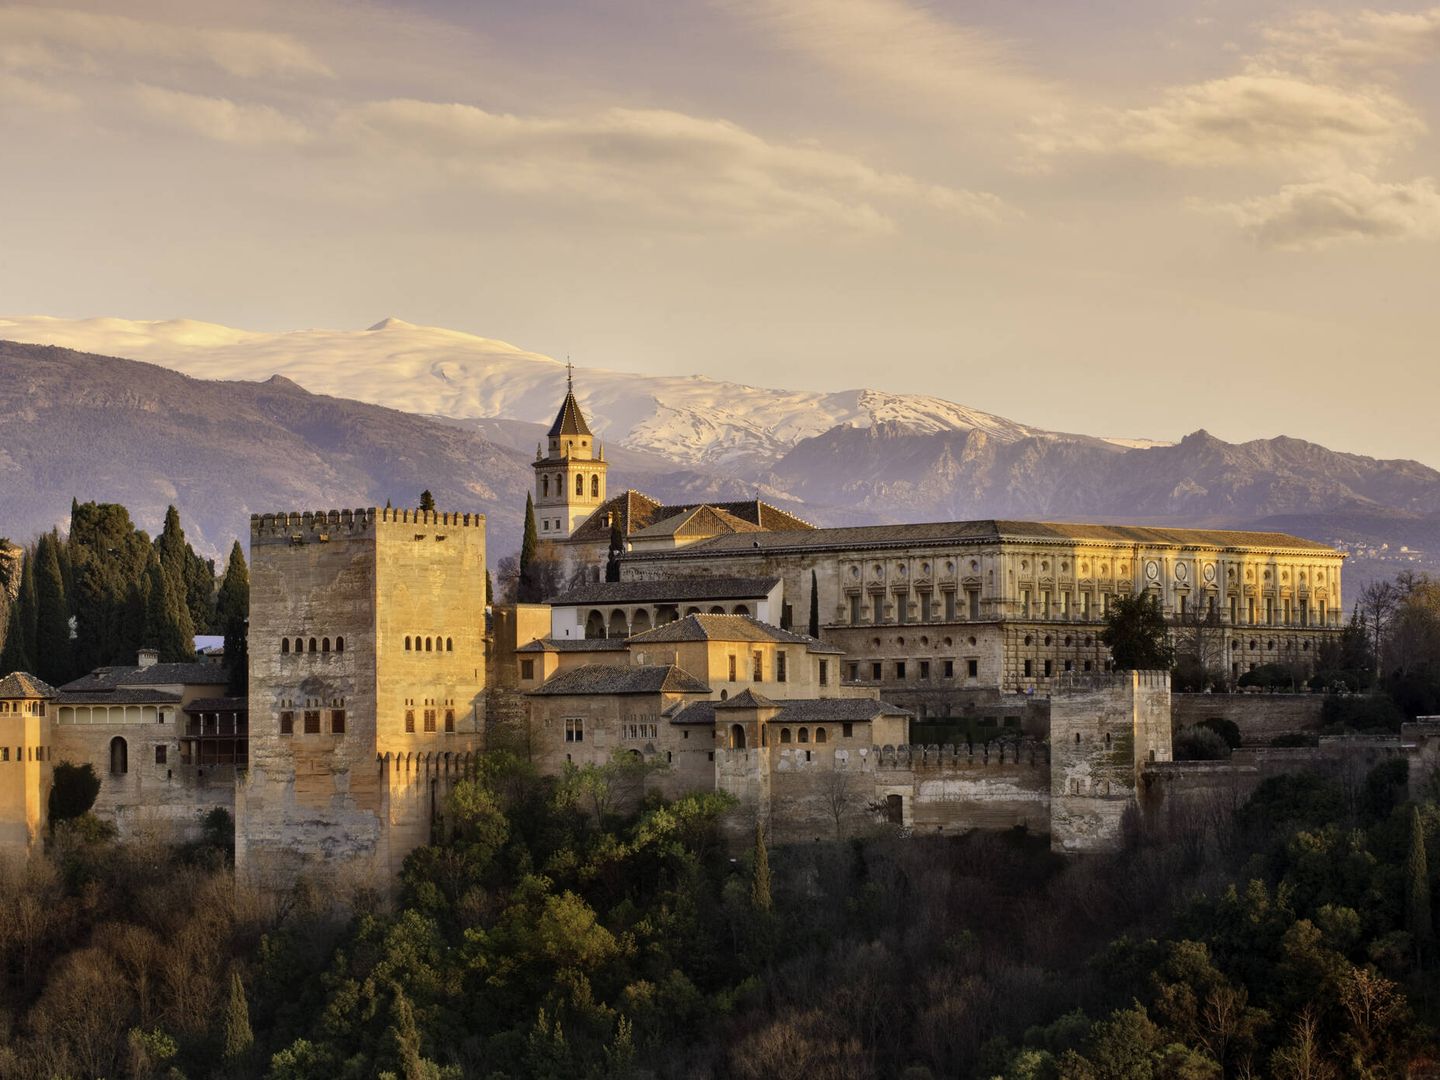 The Alhambra in Granada southern of Spain